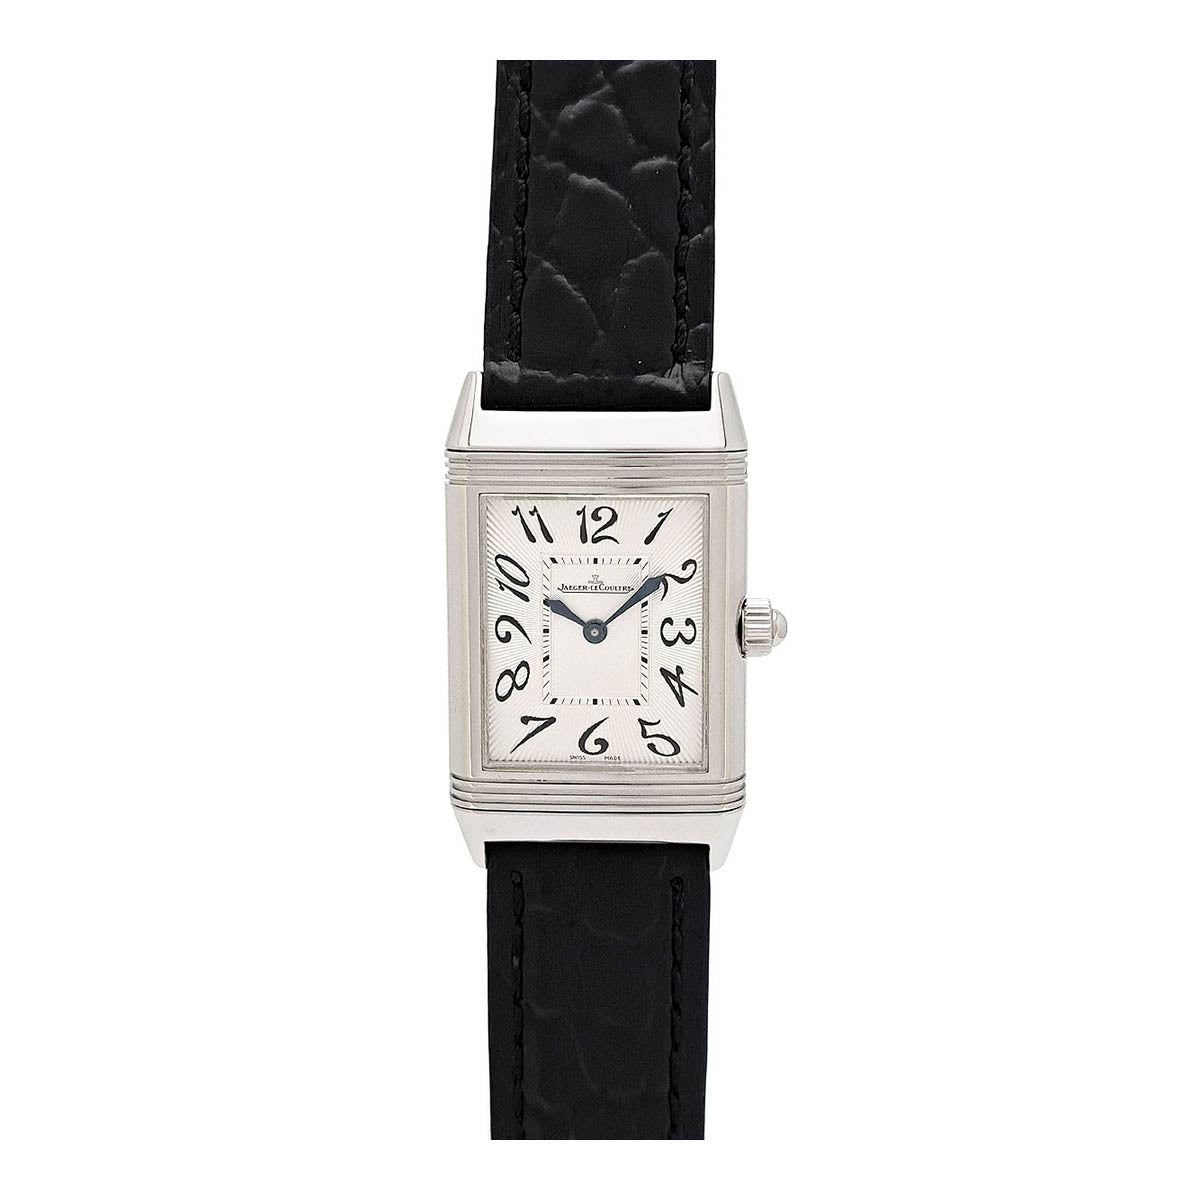 Jaeger-LeCoultre Reverso Duetto Classic Overhauled Q2568402 Hand-Wound Stainless Steel Women’s Watch Q2568402